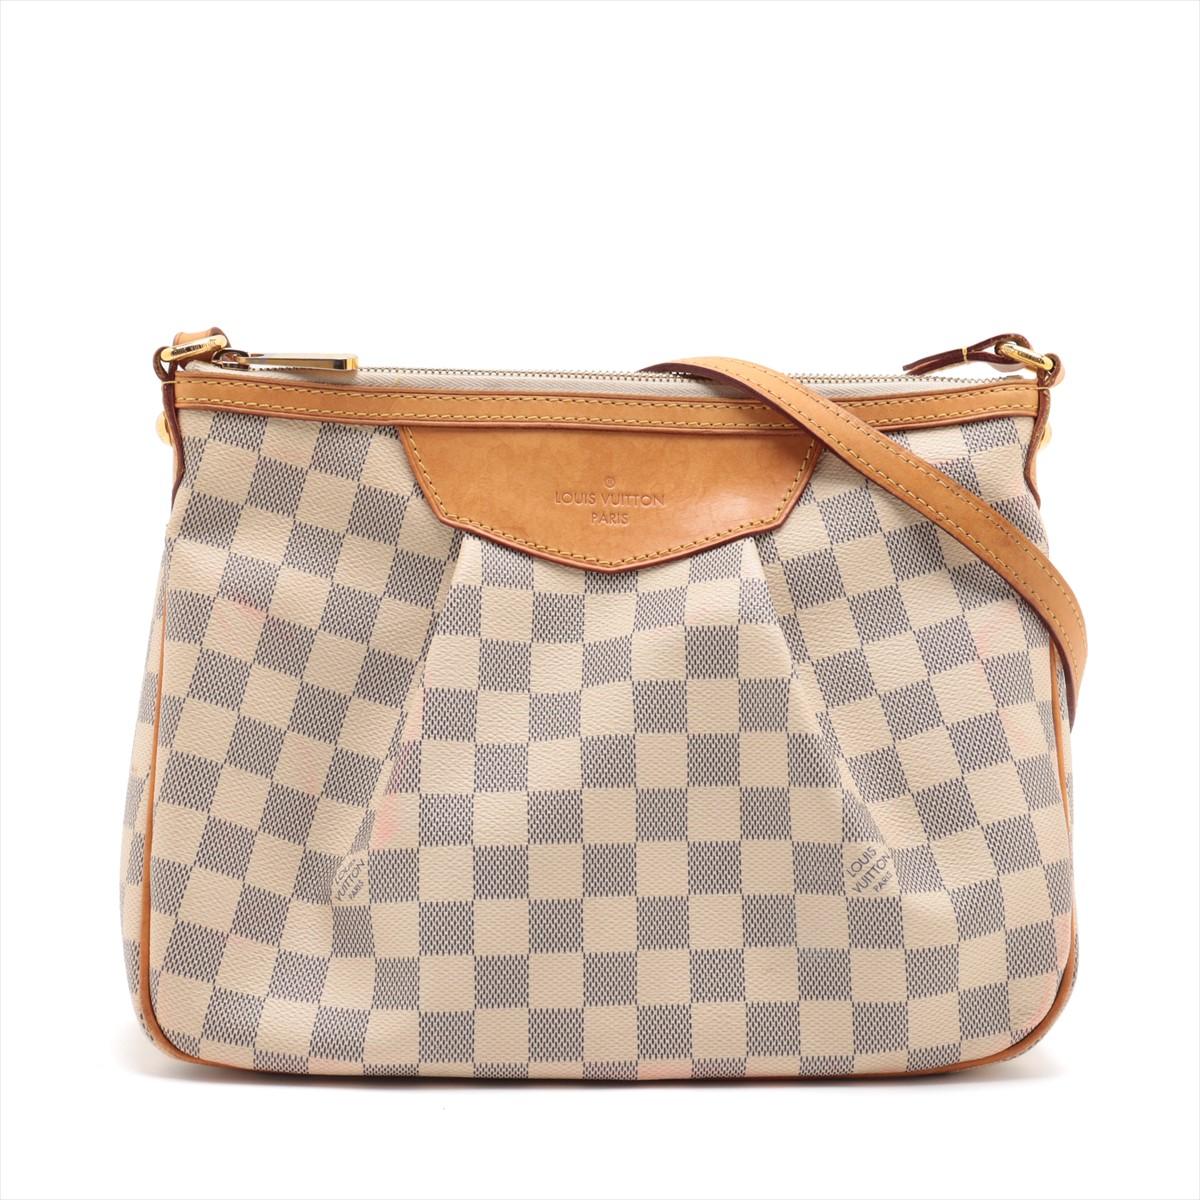 The Louis Vuitton Damier Azur Siracusa PM is a chic and practical handbag that effortlessly combines style with everyday functionality. Crafted from the iconic Damier Azur canvas, the bag features a fresh and summery color palette with a distinctive